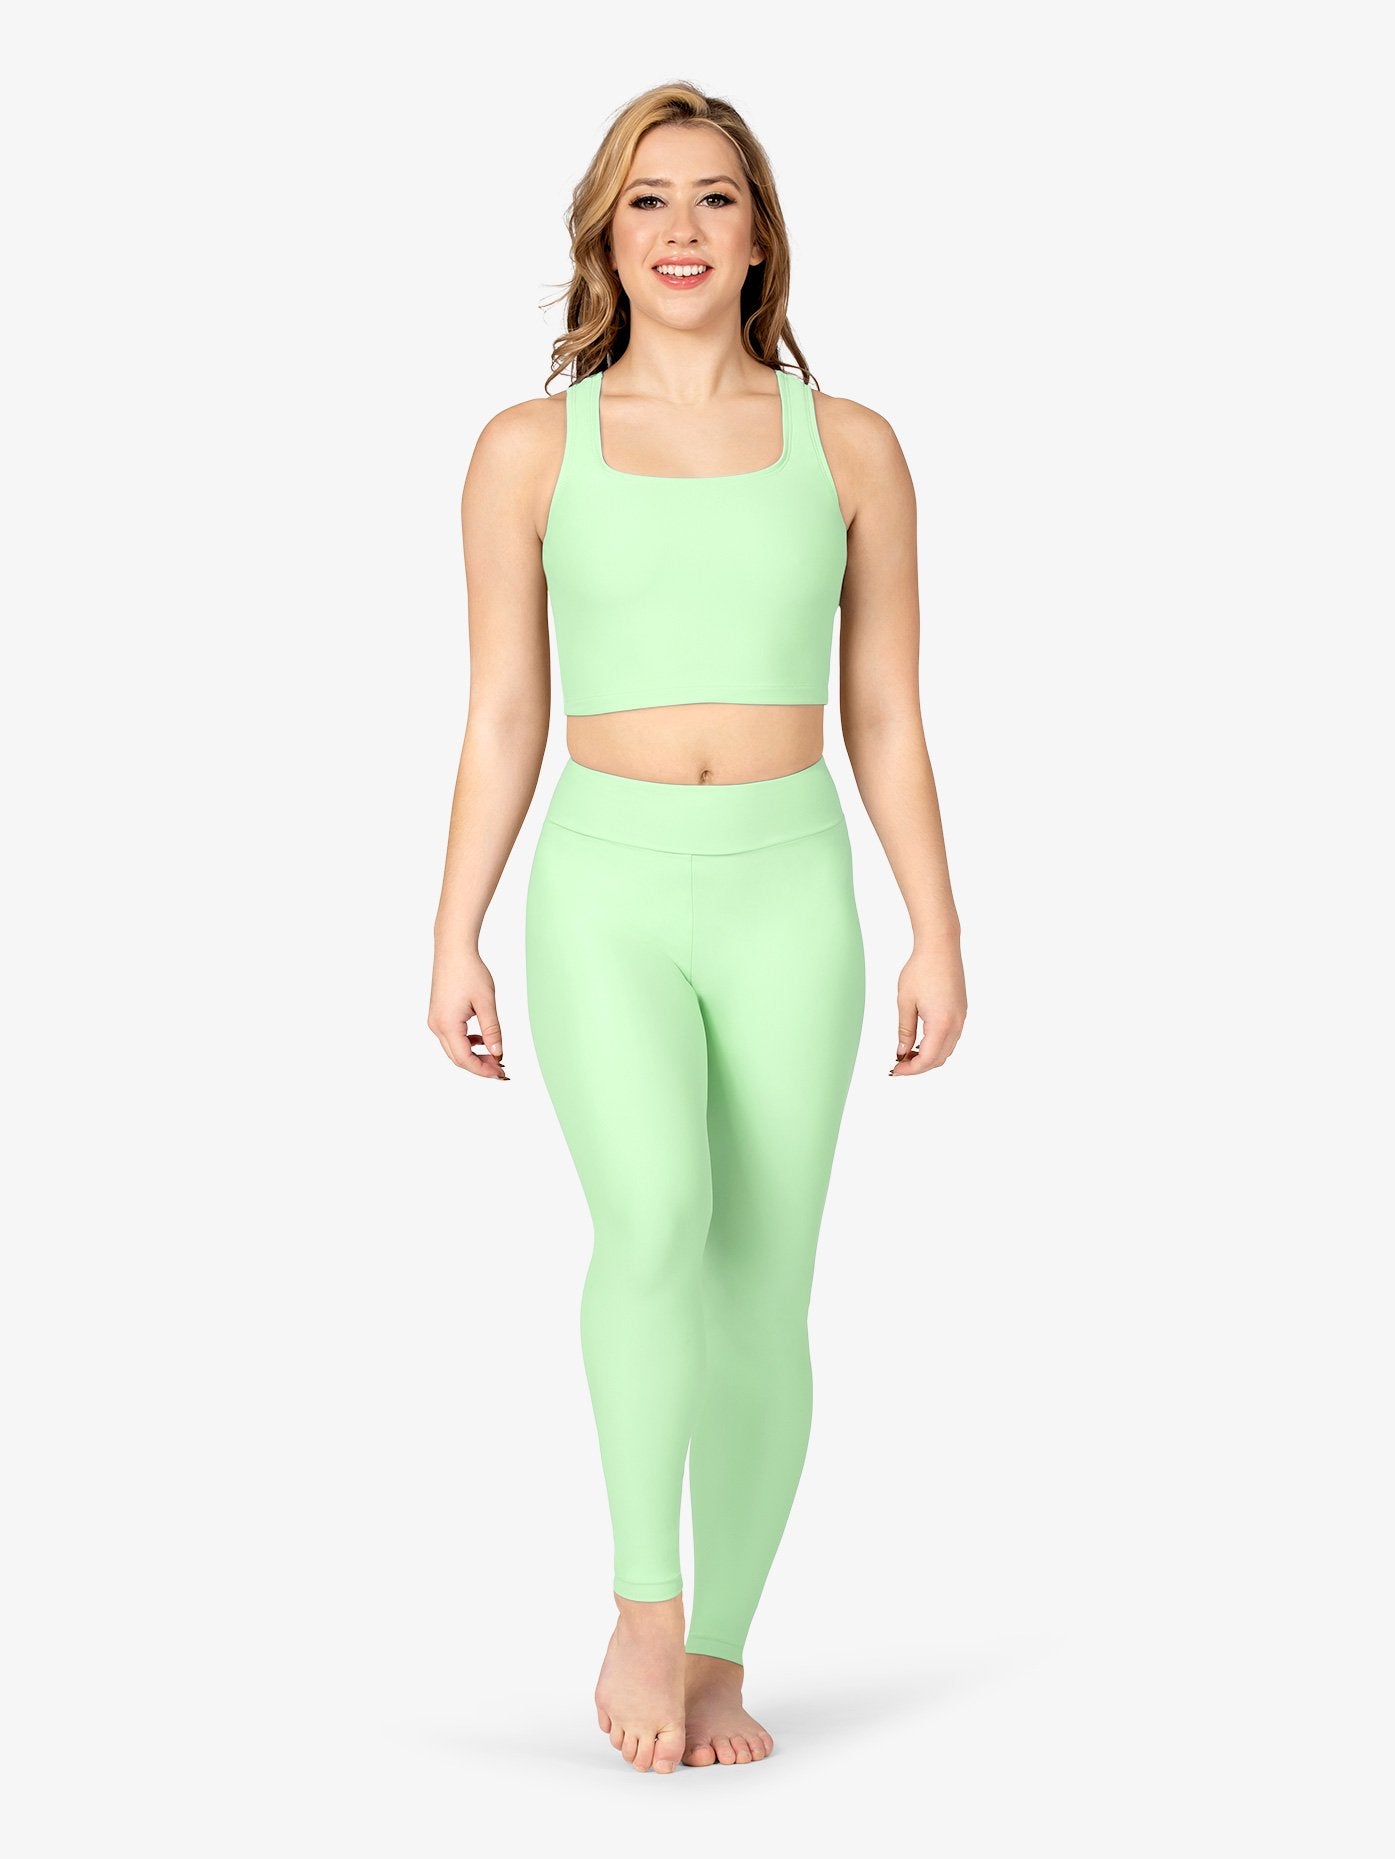 Women’s butter soft mint leggings offering comfort and style